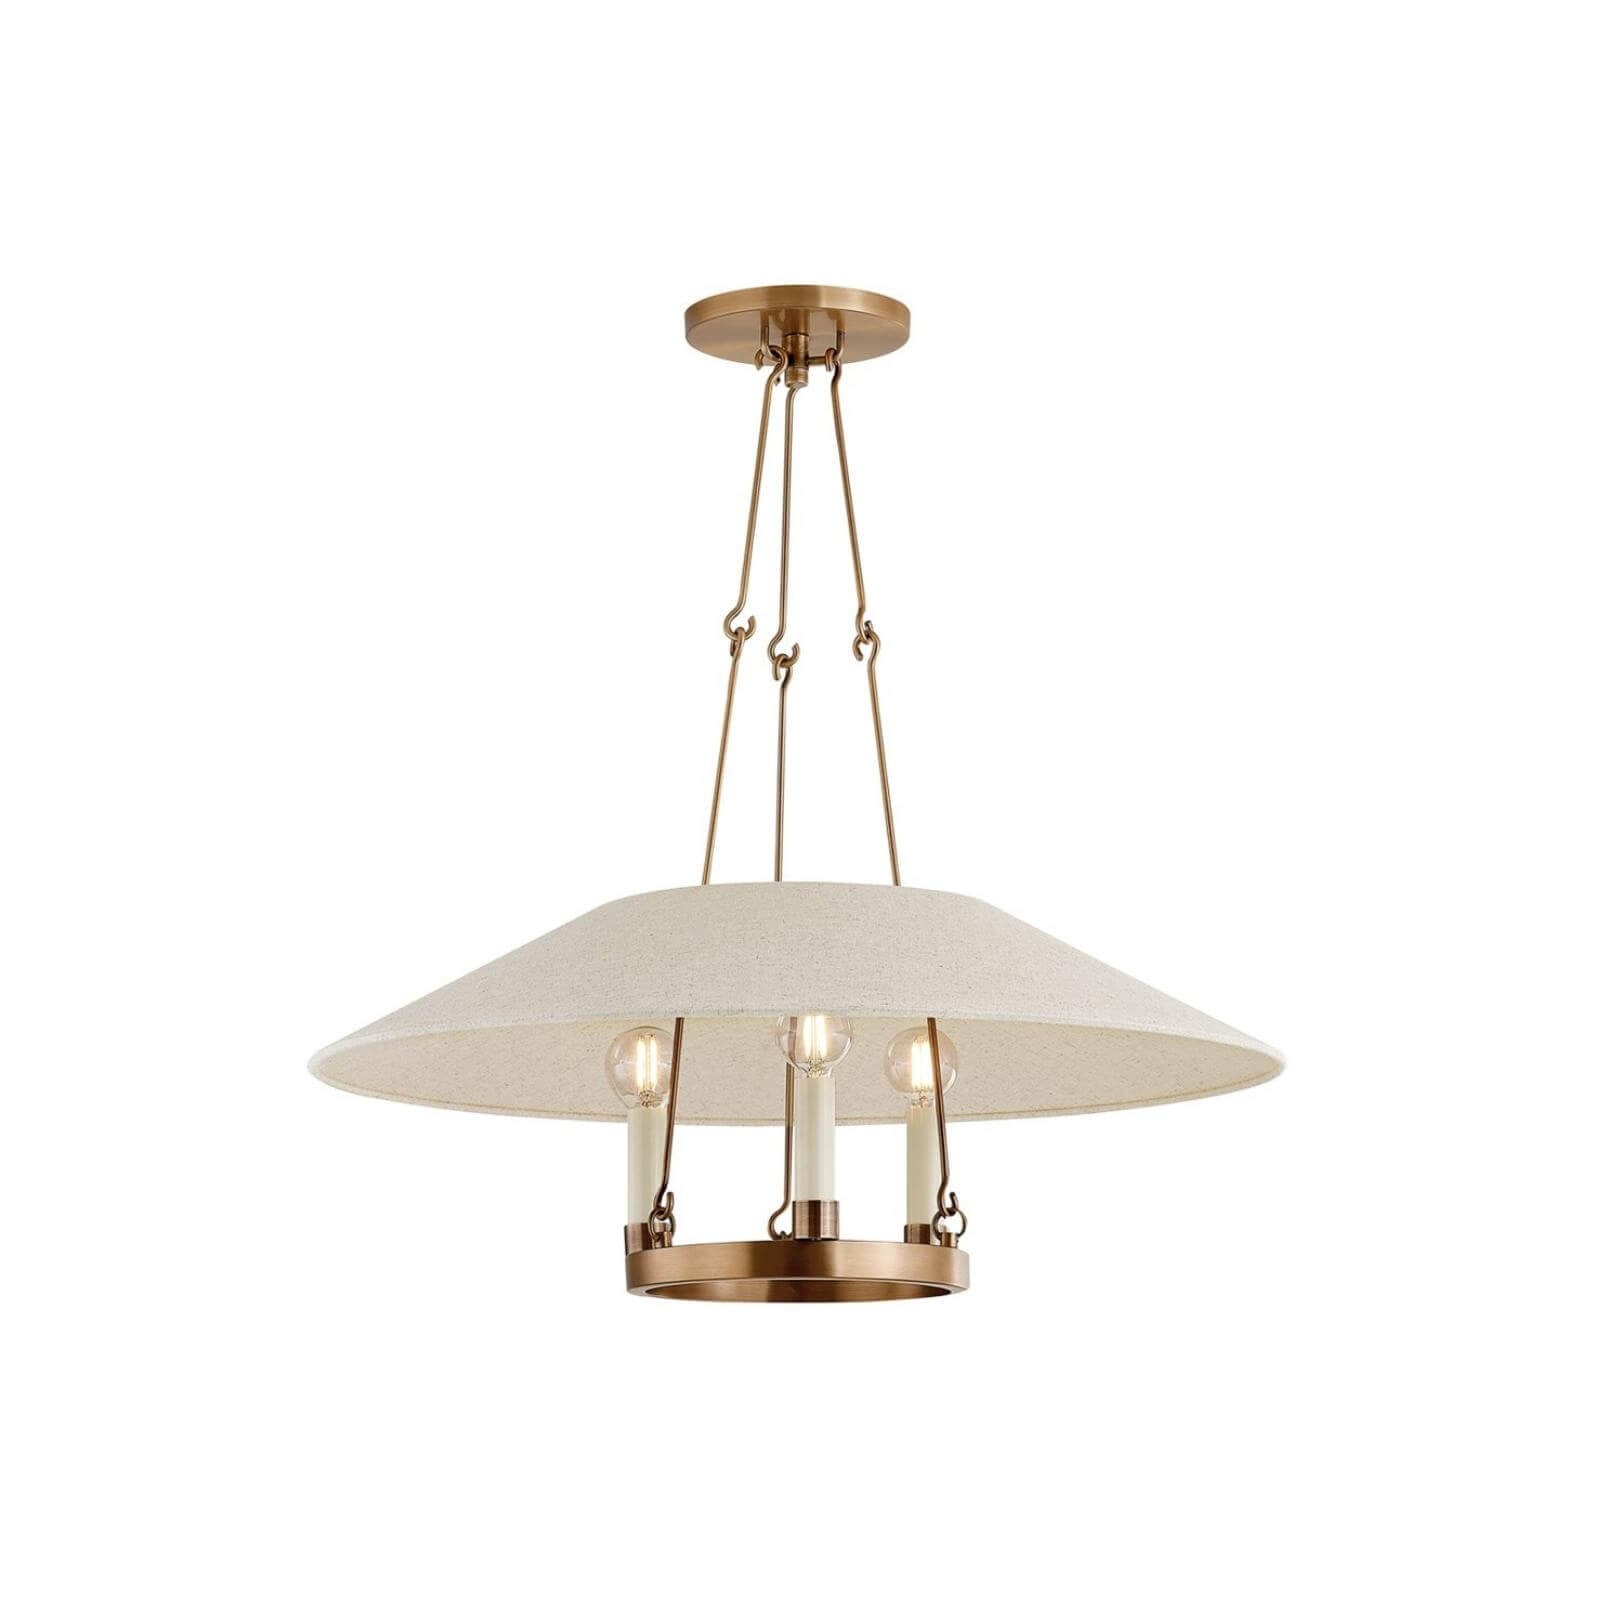 Modern chandelier in patina brass with natural linen shade